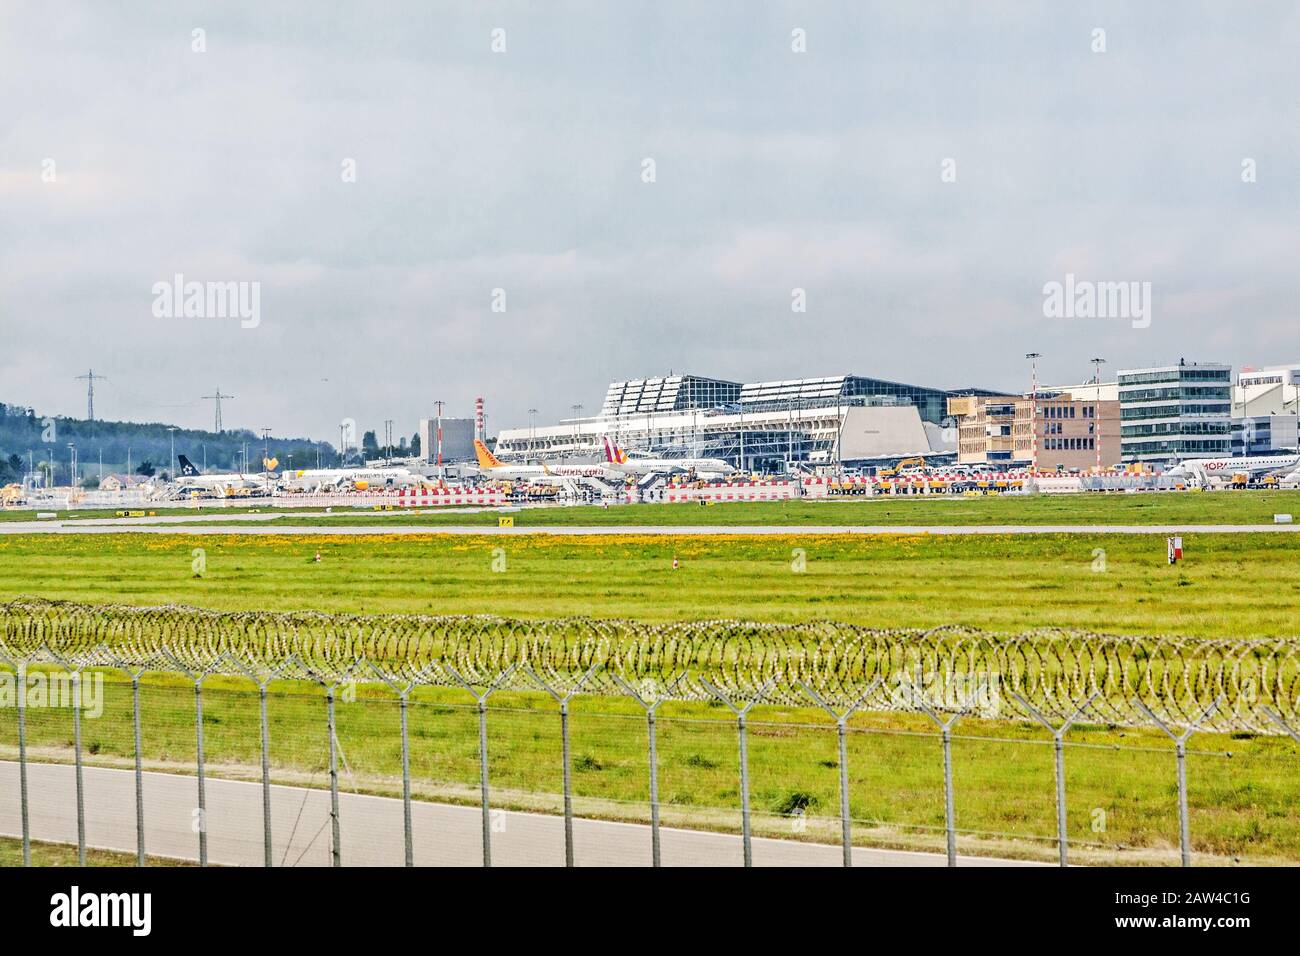 Stuttgart, Germany - May 06, 2017: Airport Stuttgart (Manfred-Rommel-Flughafen), Terminal, exterior view with airplanes in parking position, runway in Stock Photo